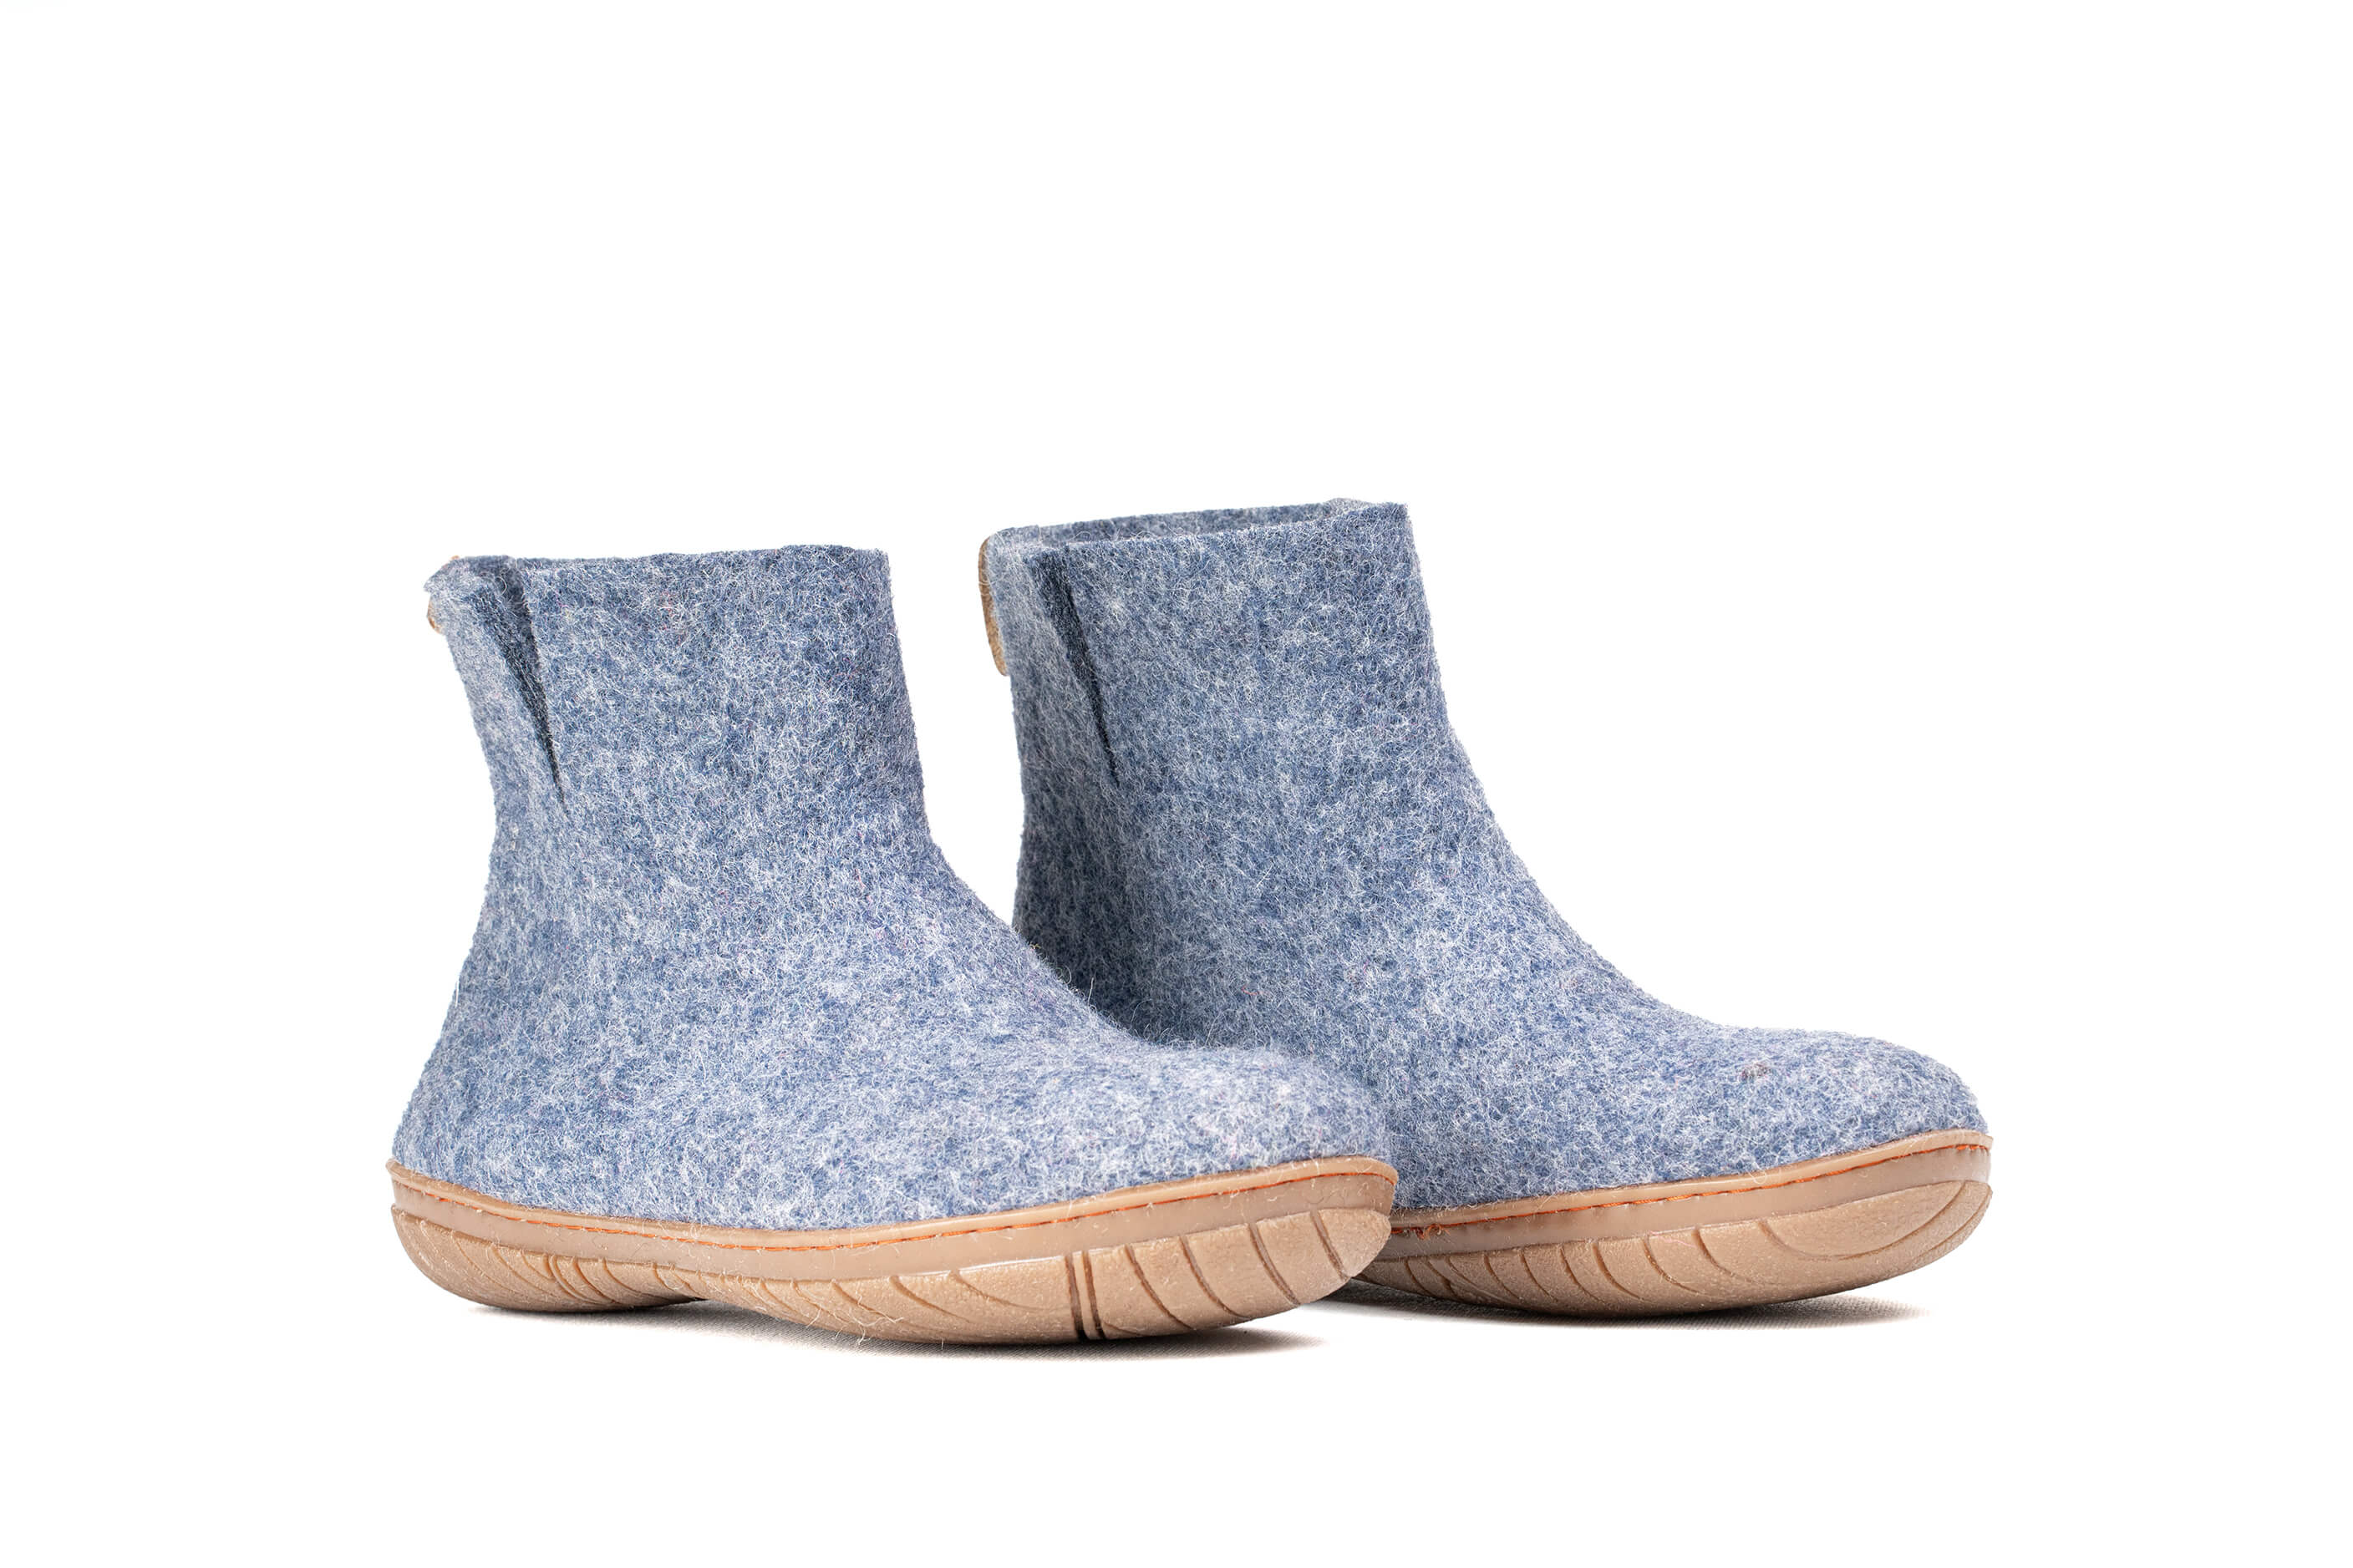 Outdoor Low Boots With Rubber Sole - Denim